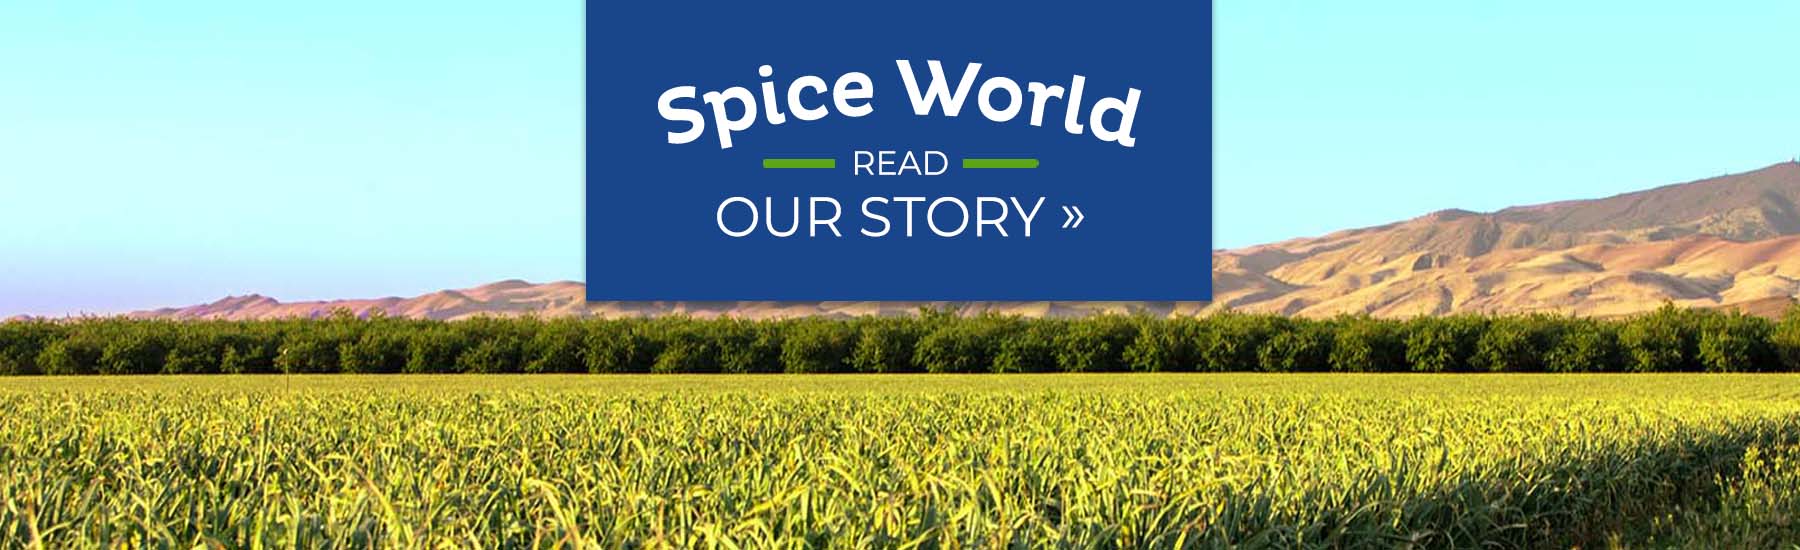 The Spice World Story